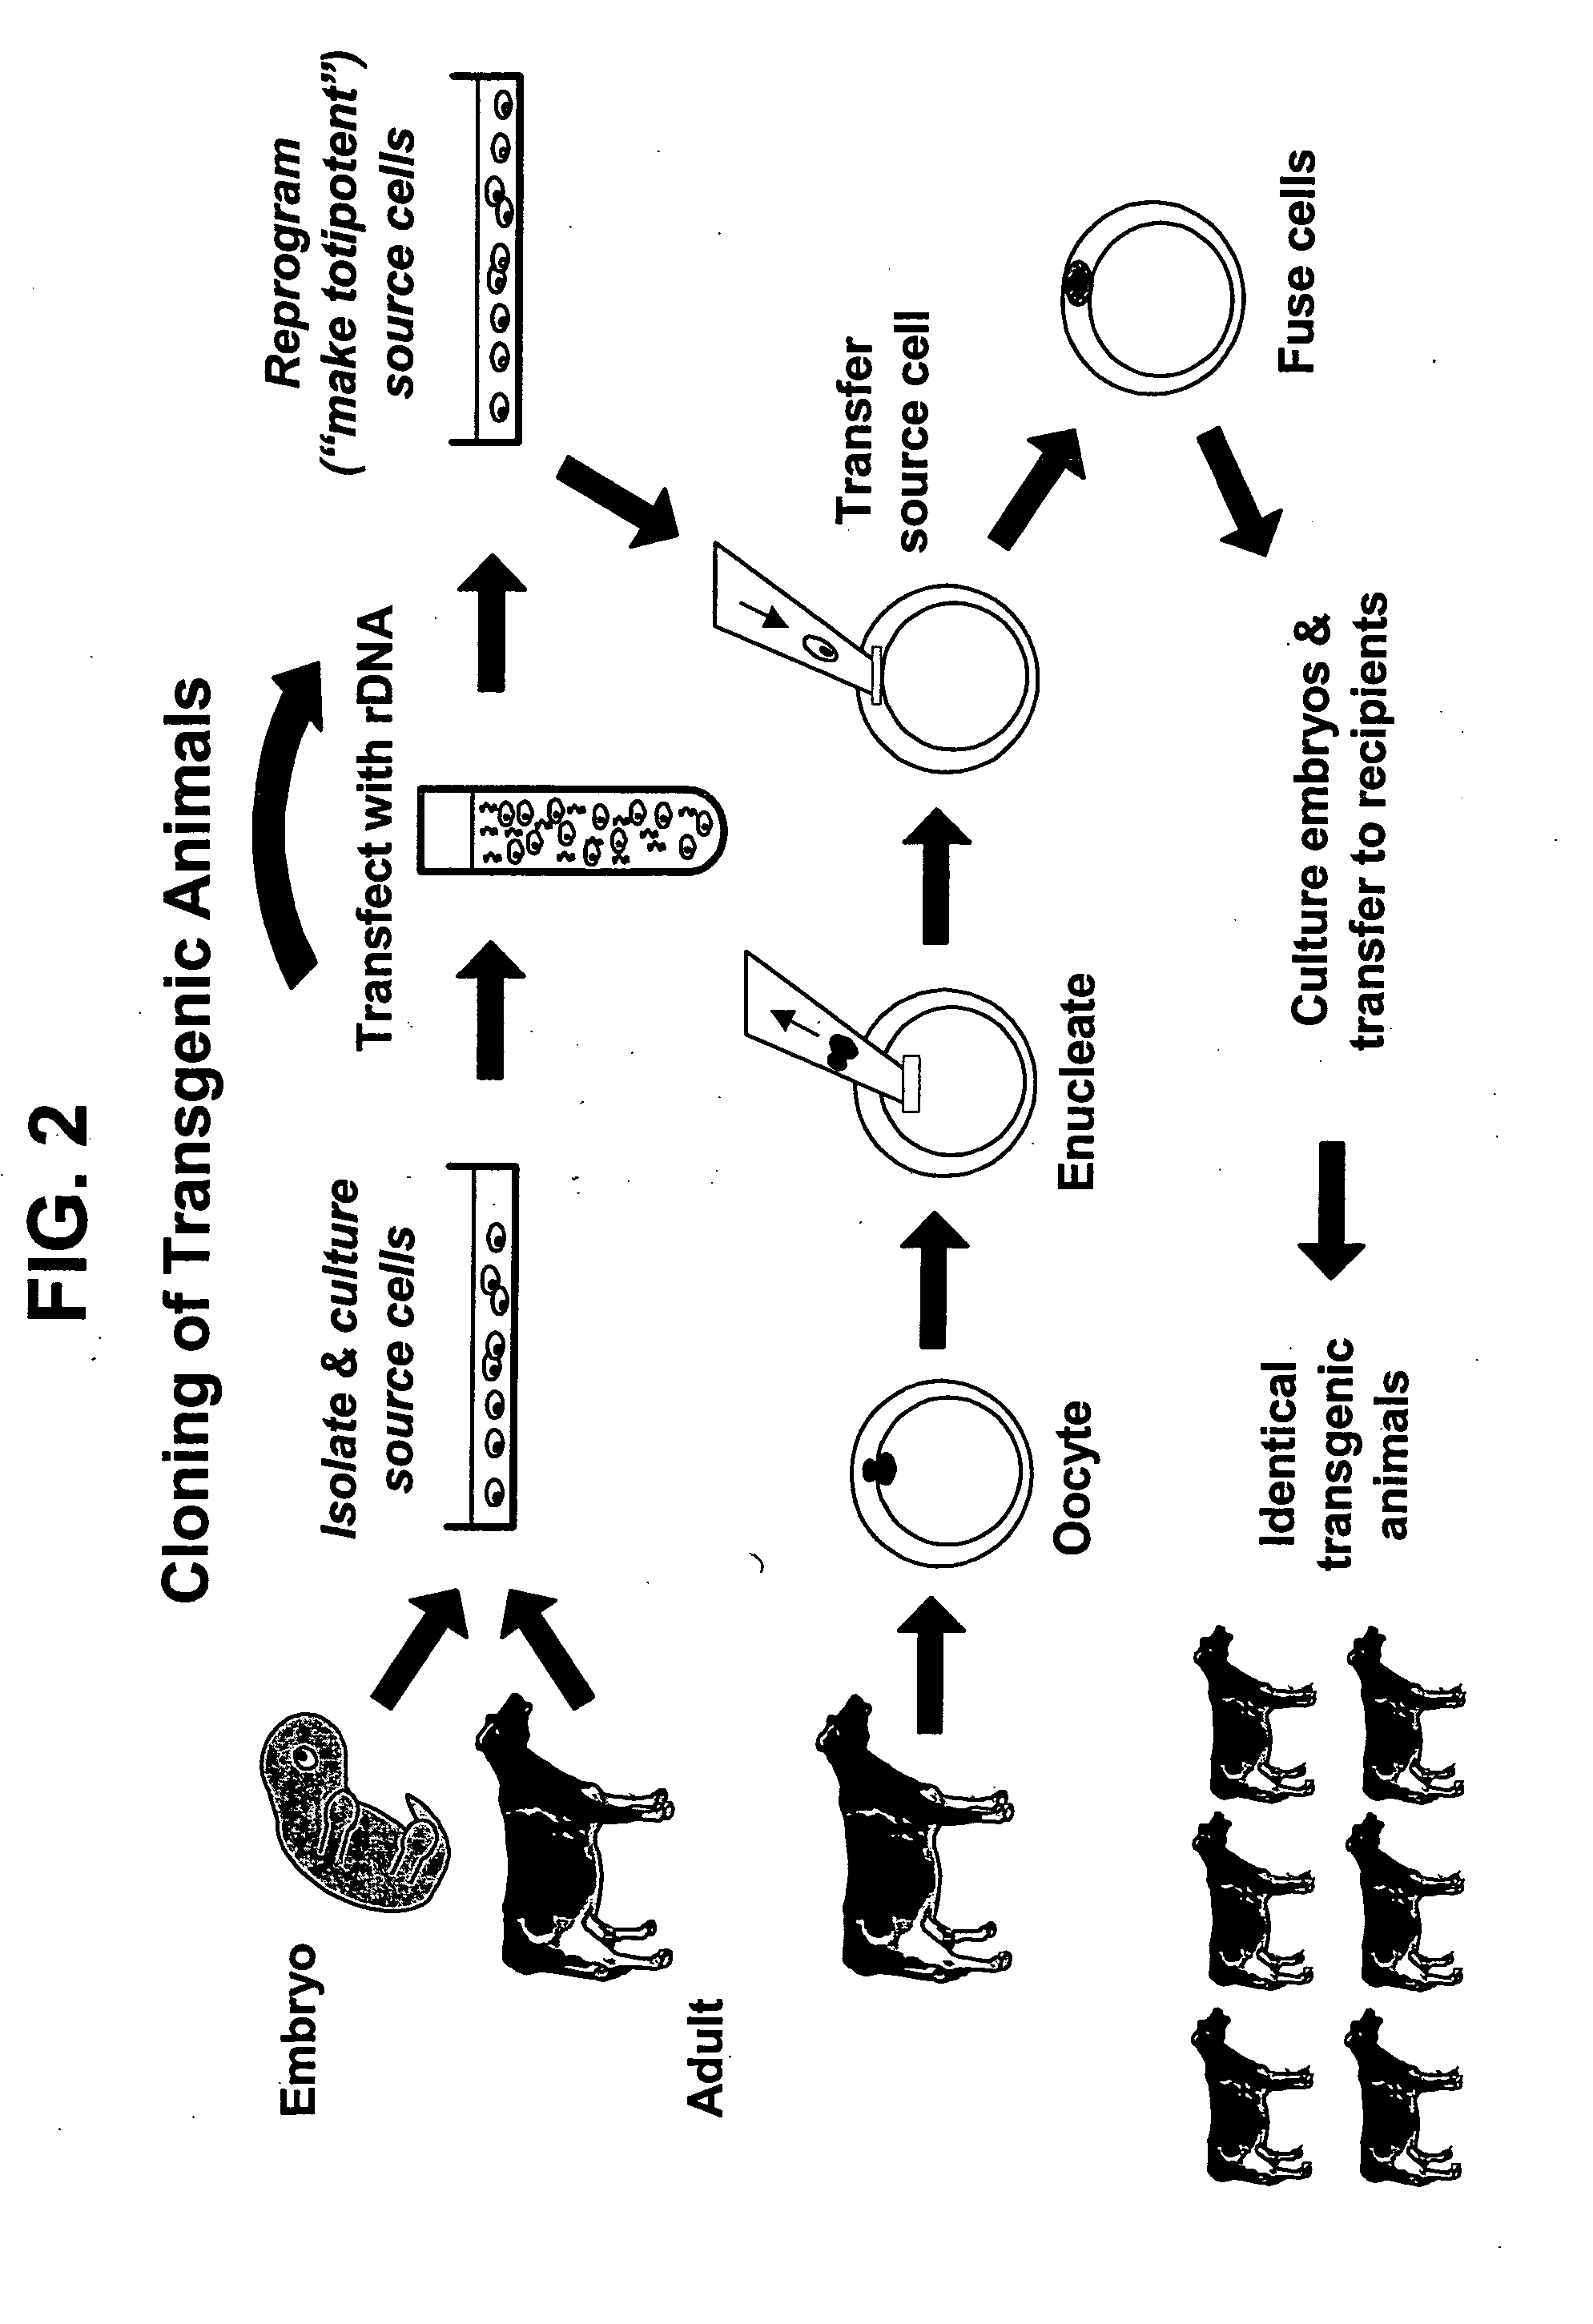 Method for the rapid selection of homozygous primary cell lines for the production of transgenic animals by somatic cell nuclear transfer